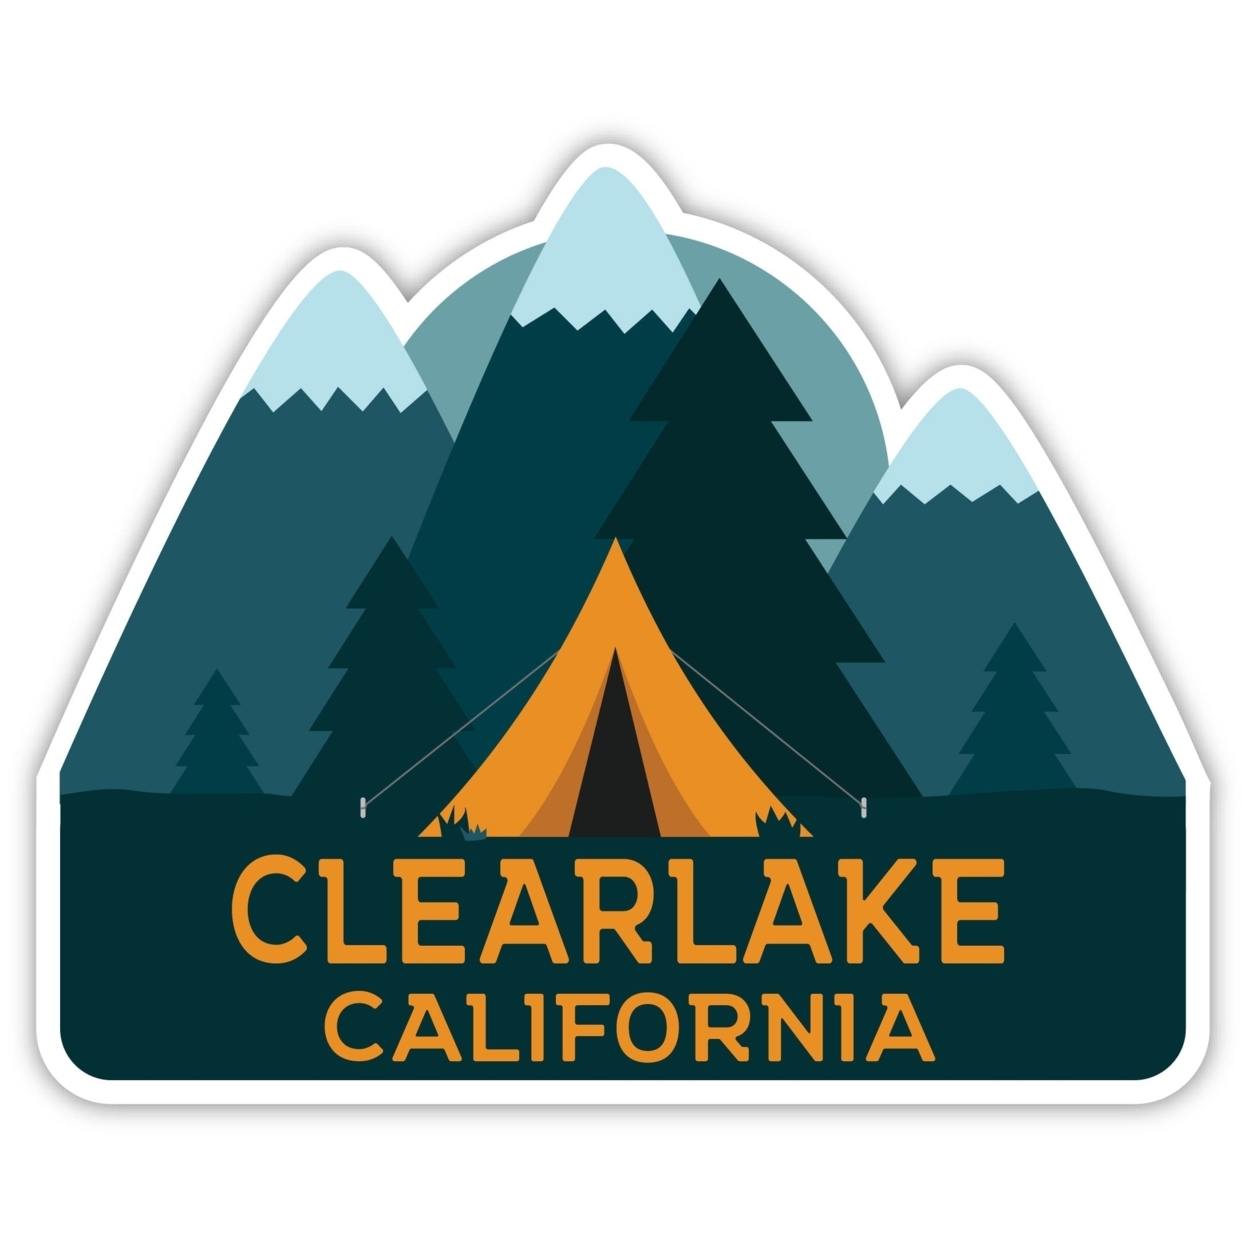 Clearlake California Souvenir Decorative Stickers (Choose Theme And Size) - Single Unit, 10-Inch, Great Outdoors